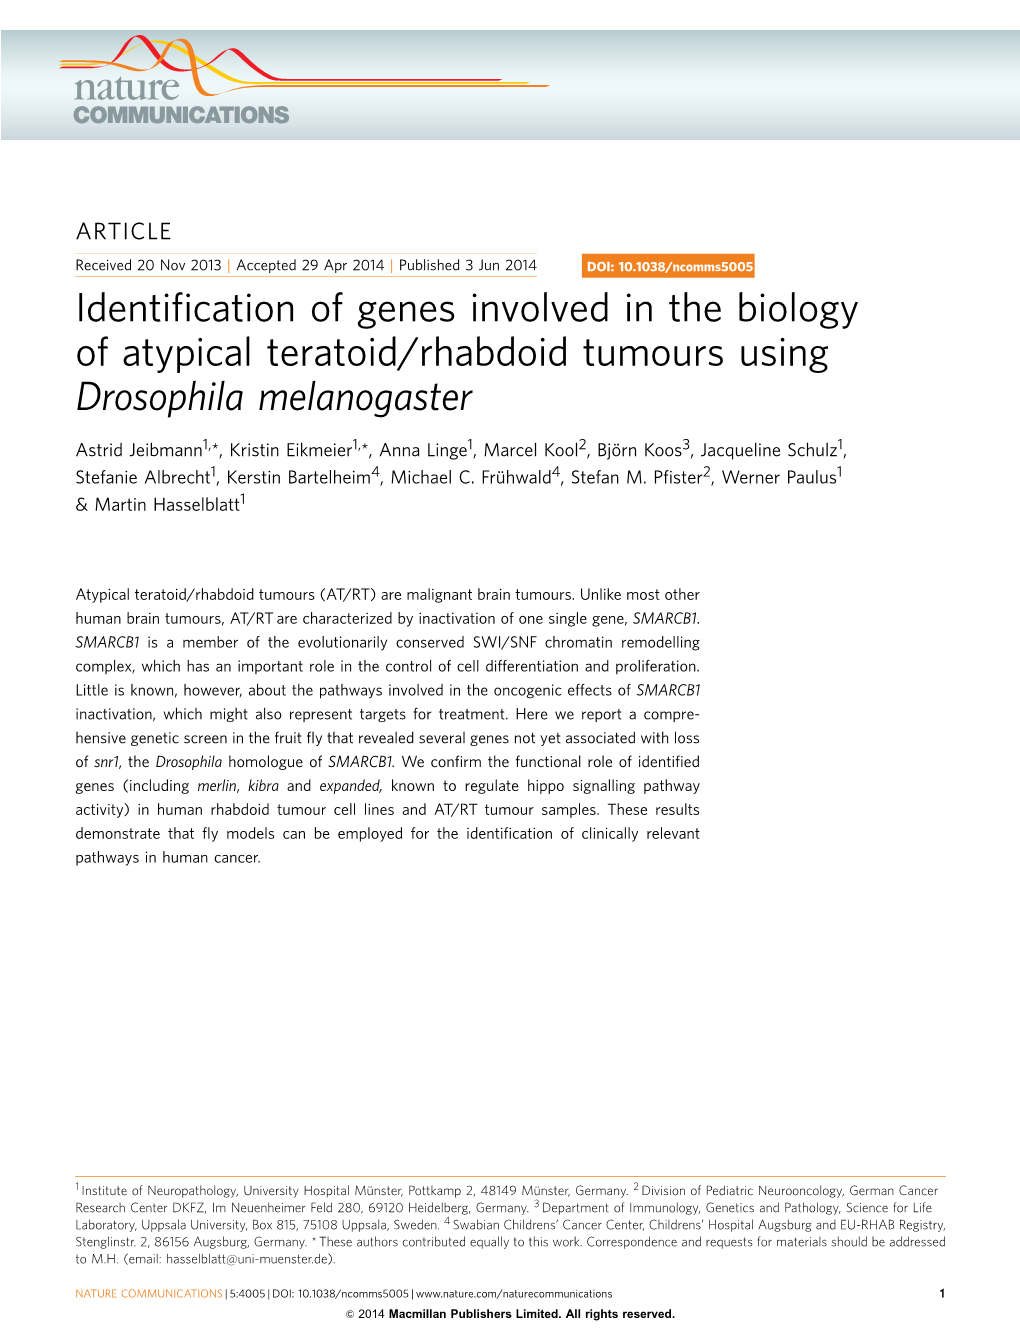 Identification of Genes Involved in the Biology of Atypical Teratoid/Rhabdoid